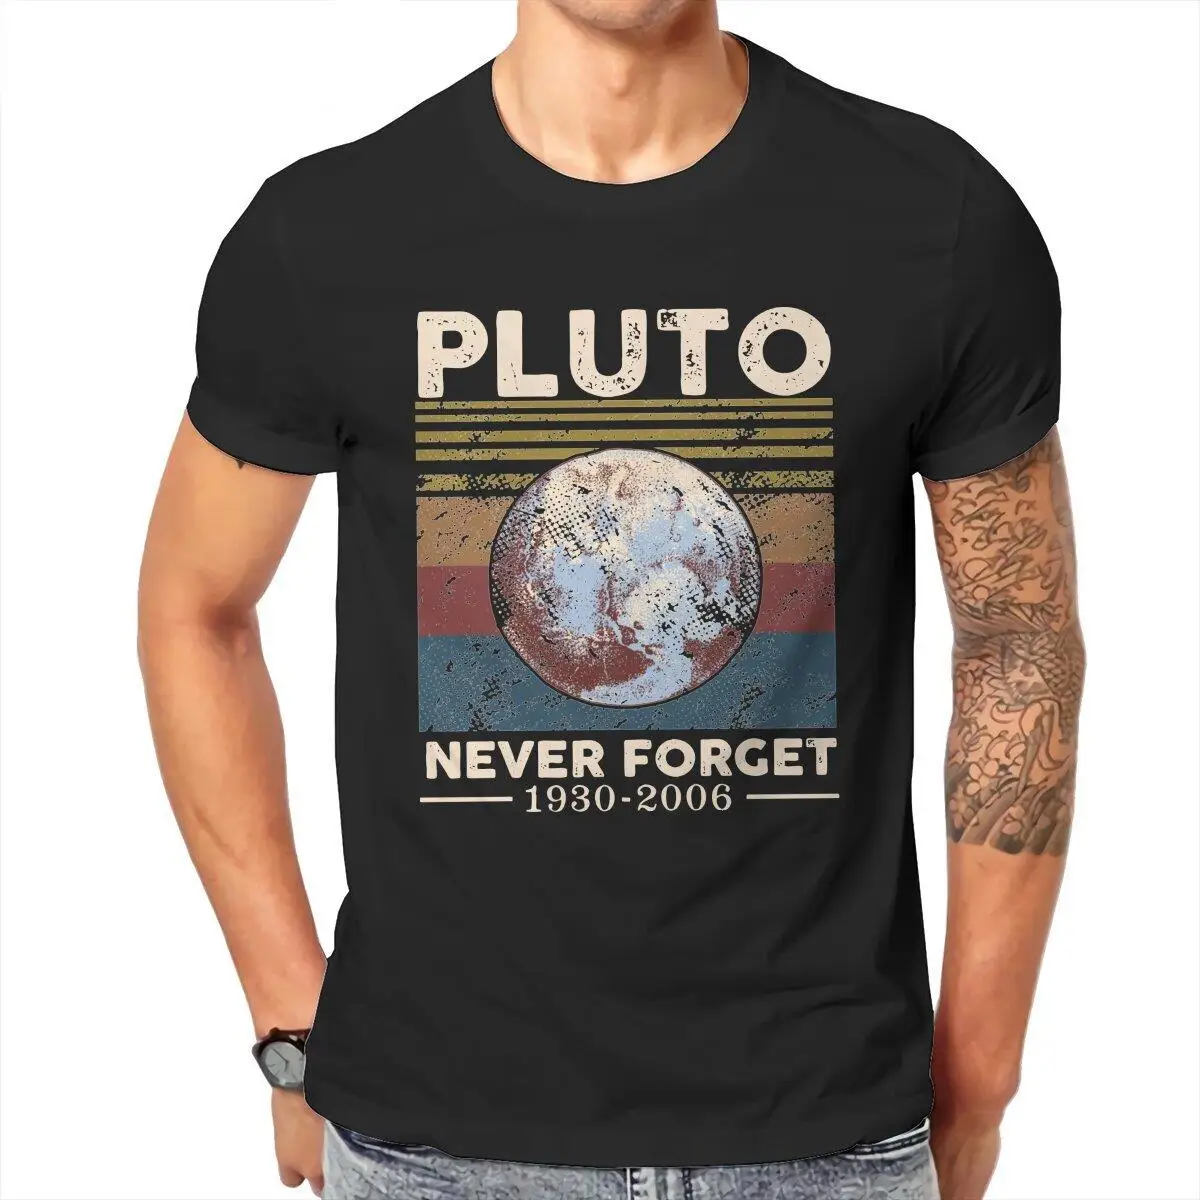 Men's T-Shirts Never Forget Pluto Vintage Retro Fun Cotton Tees Short Sleeve  T Shirts O Neck Tops Plus Size